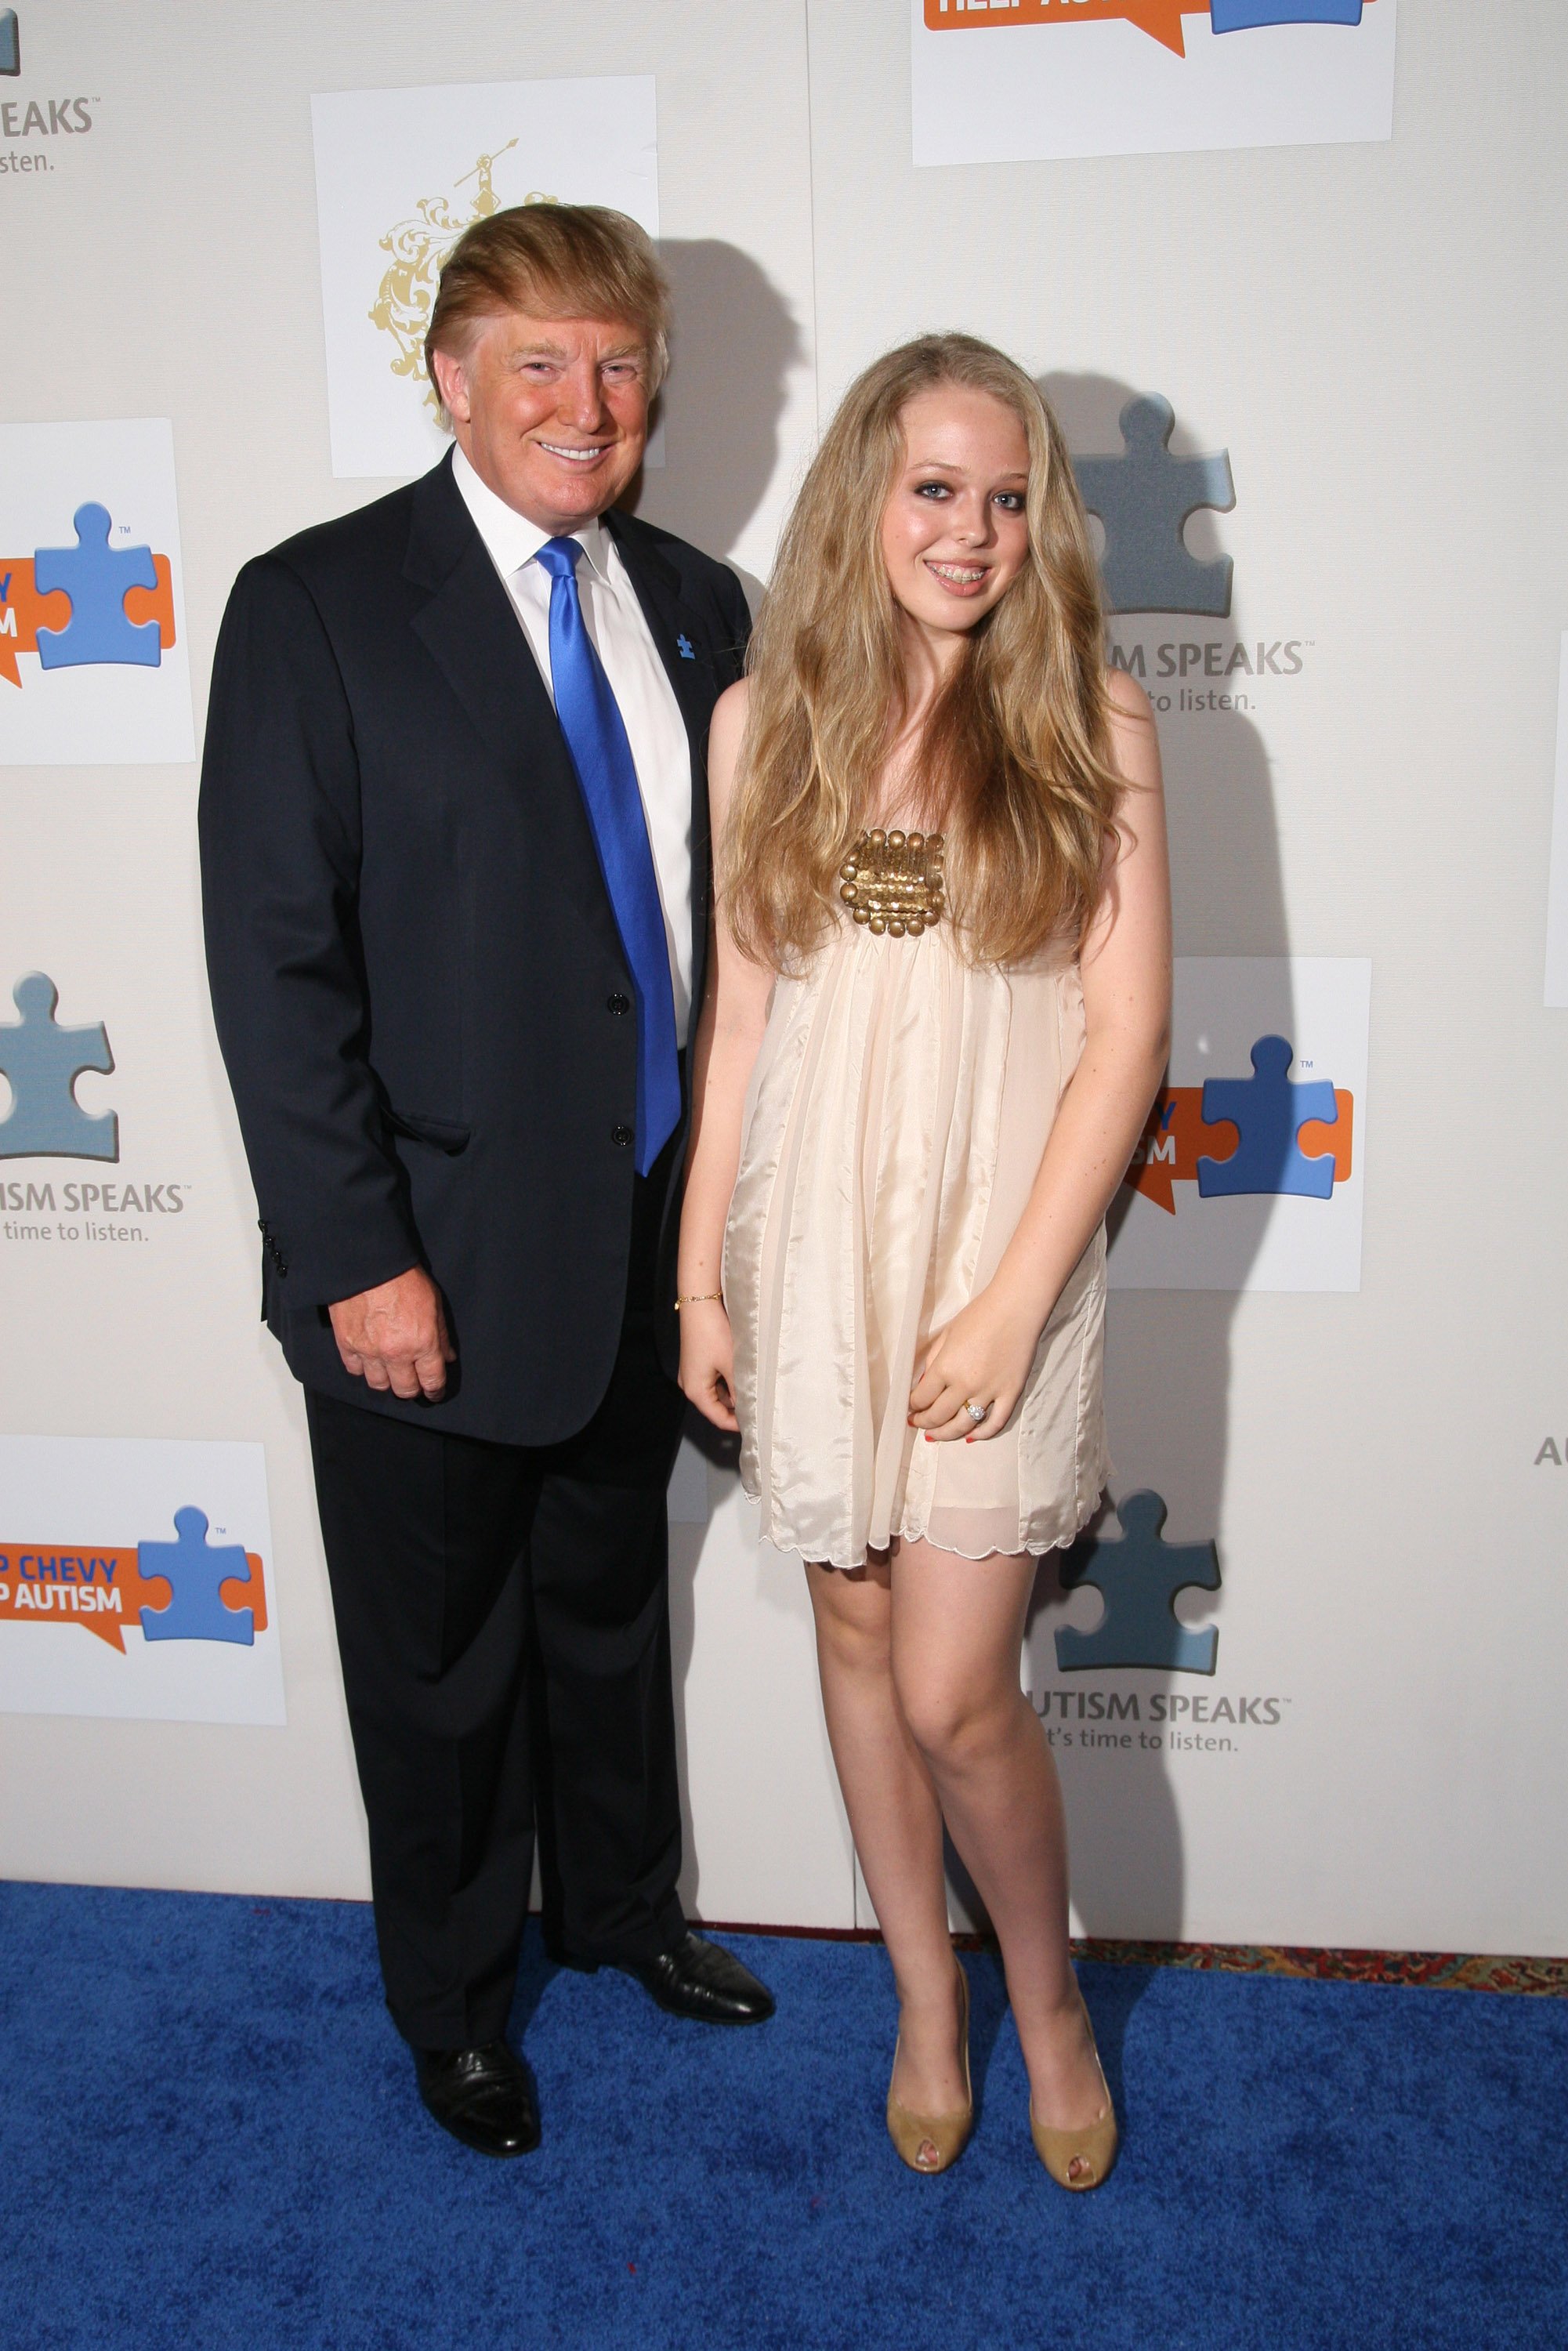 Donald Trump and Tiffany Trump pose on the red carpet for Autism Speaks on March 30, 2008, in Palm Beach, Florida. | Source: Getty Images.